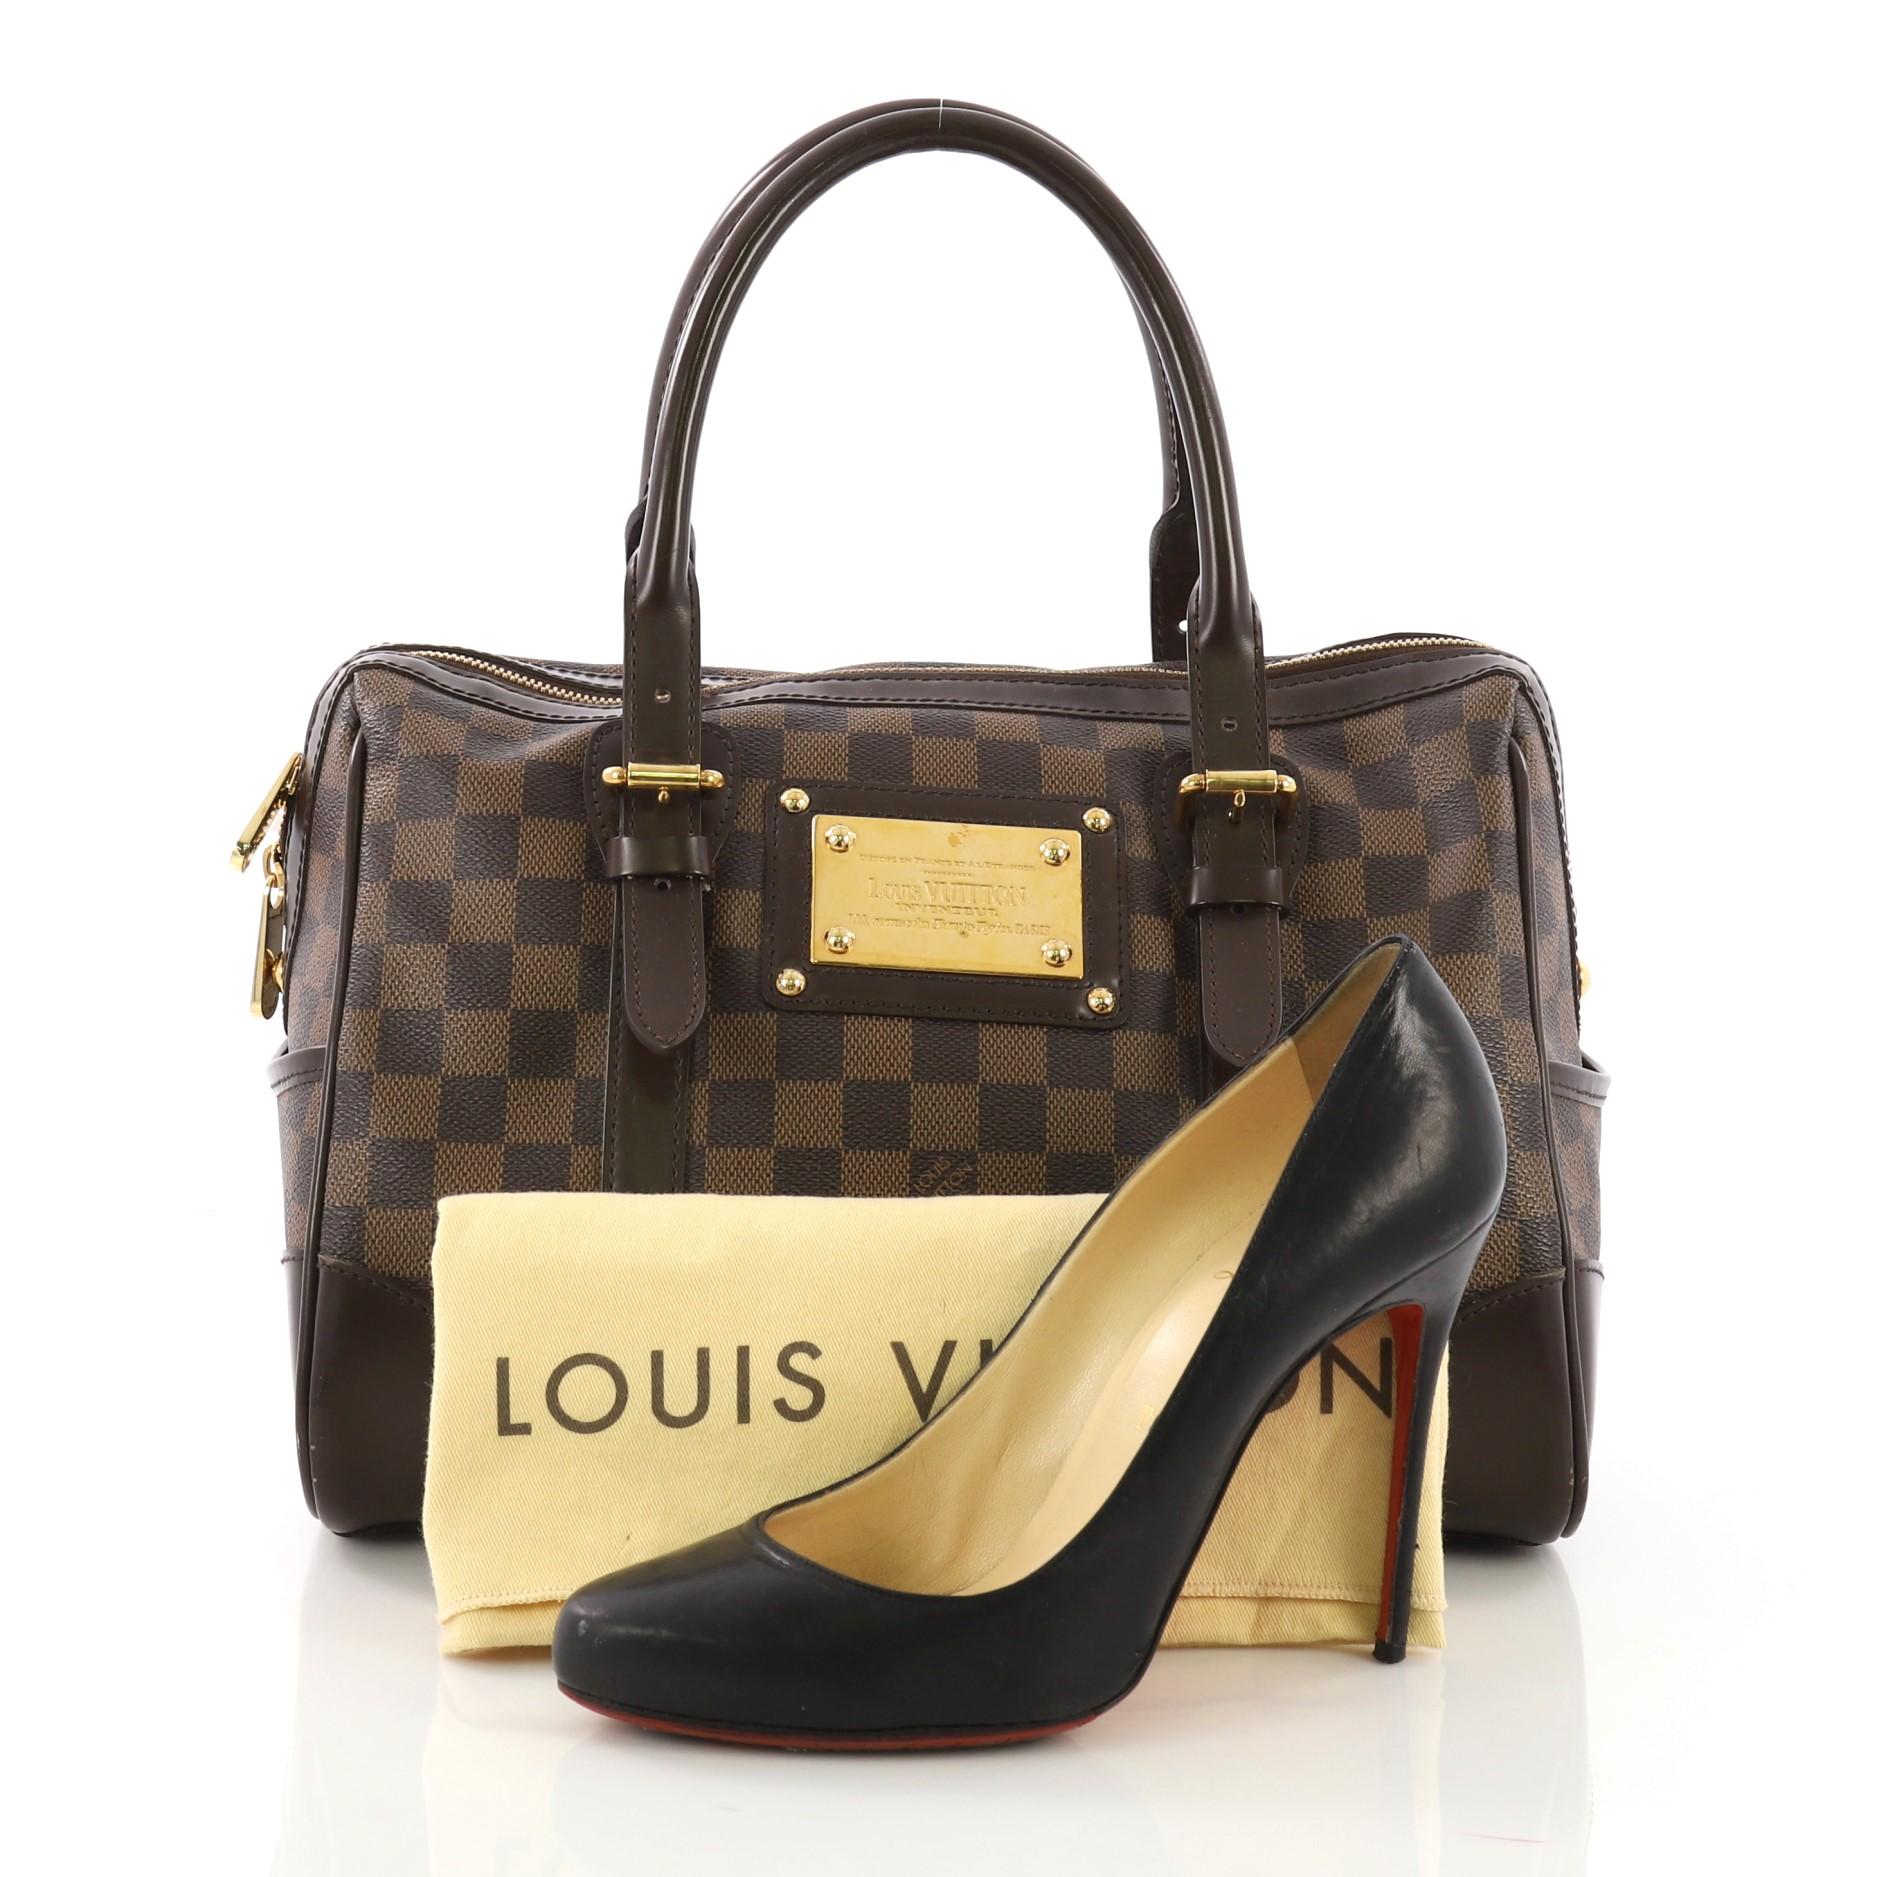 This Louis Vuitton Berkeley Handbag Damier, crafted from damier ebene coated canvas, features dual rolled leather handles with belt and buckle details, exterior side pockets, and gold-tone hardware. Its top zip closure opens to a red microfiber